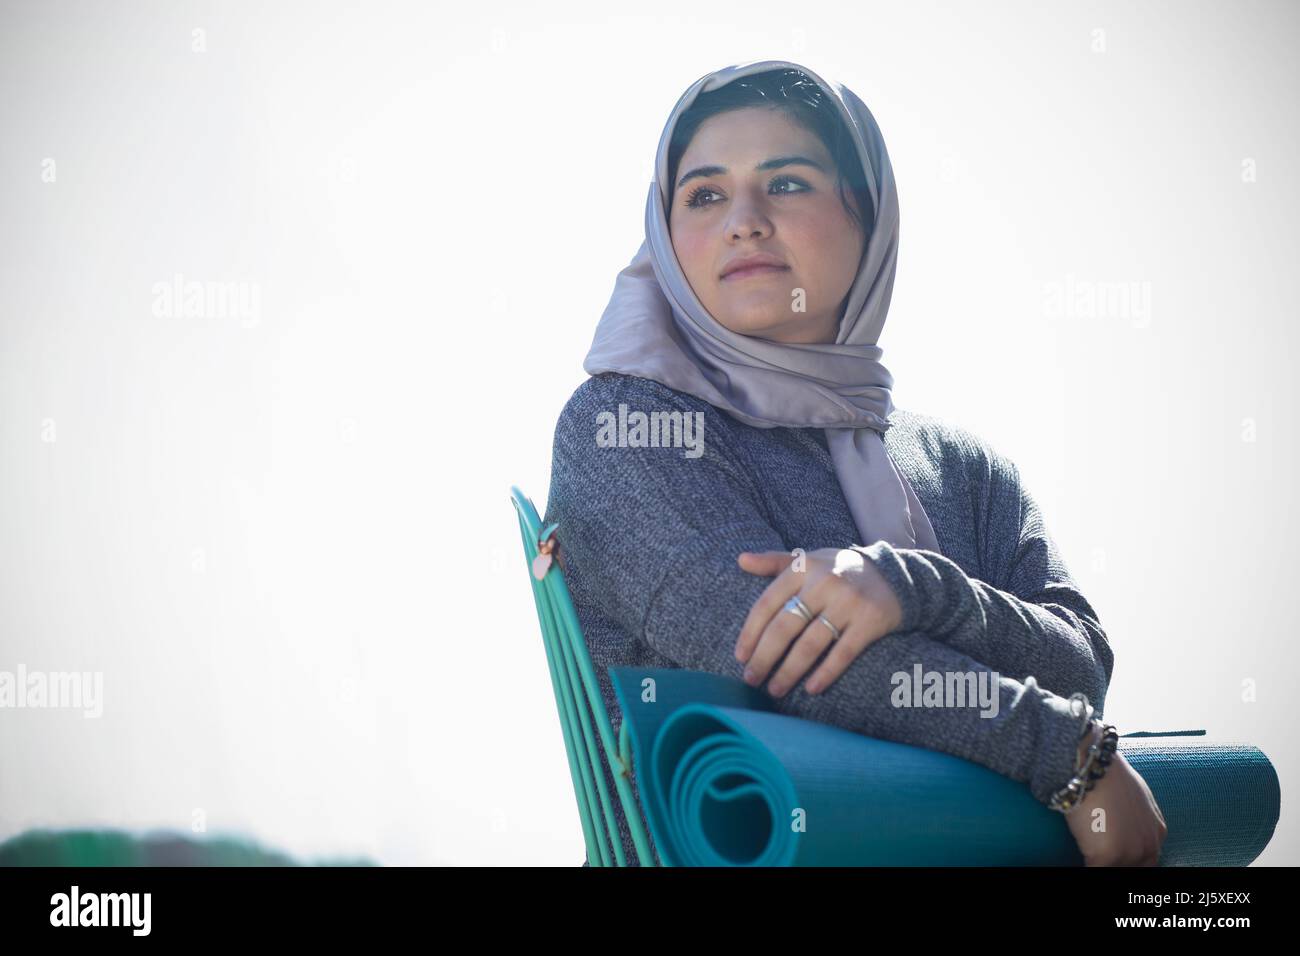 Thoughtful young woman in hijab with yoga mat Stock Photo